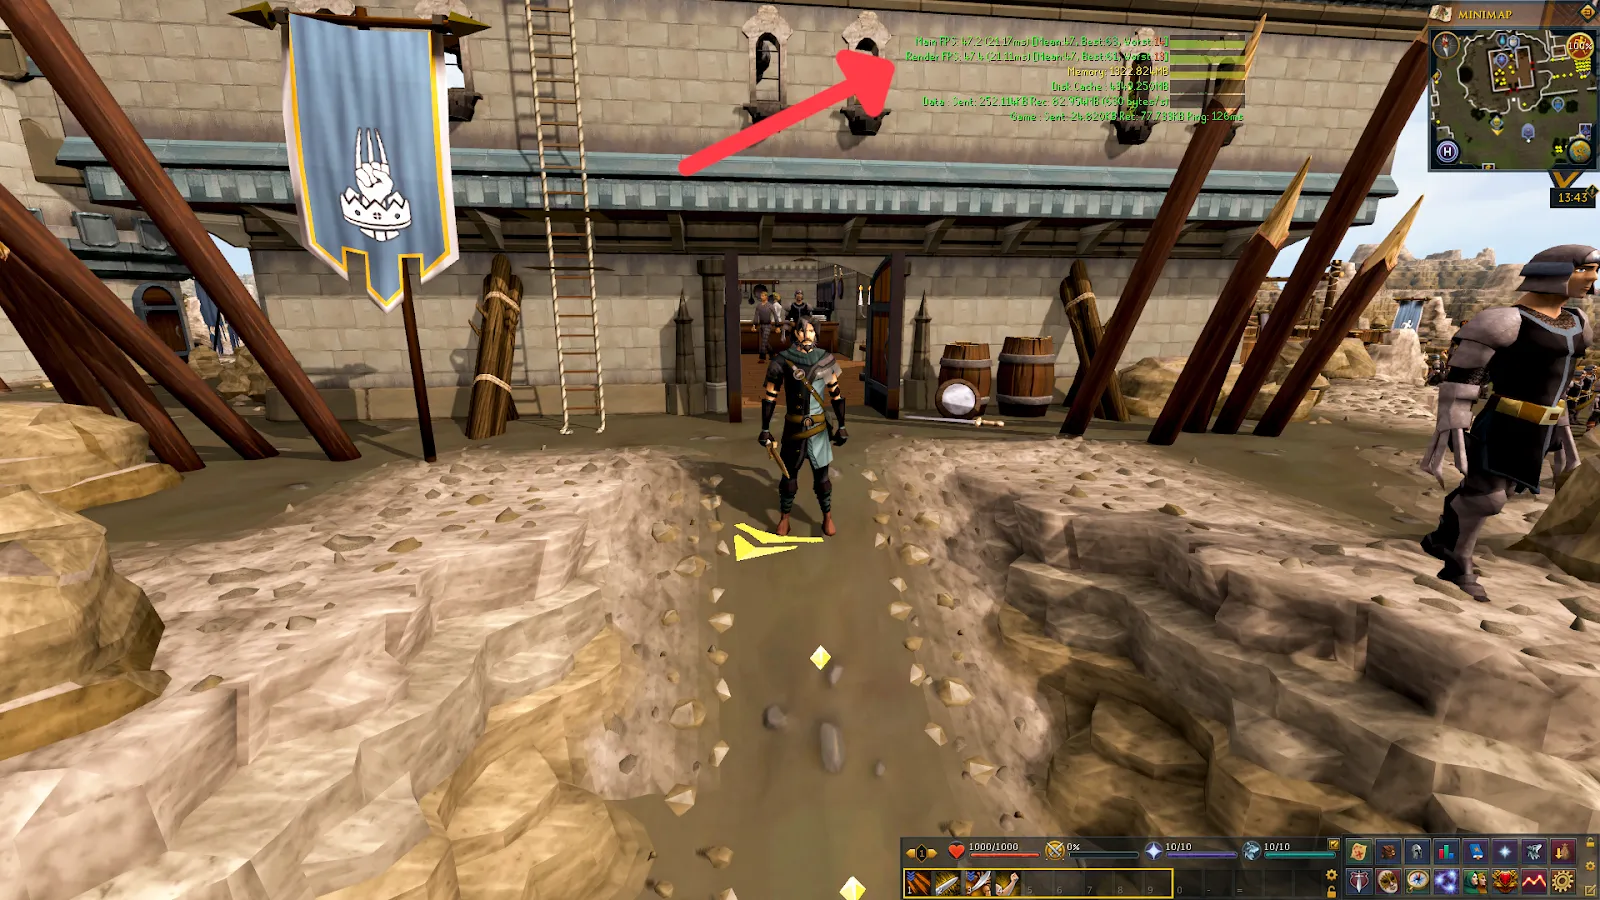 Ingame show FPS in Runescape demonstration image